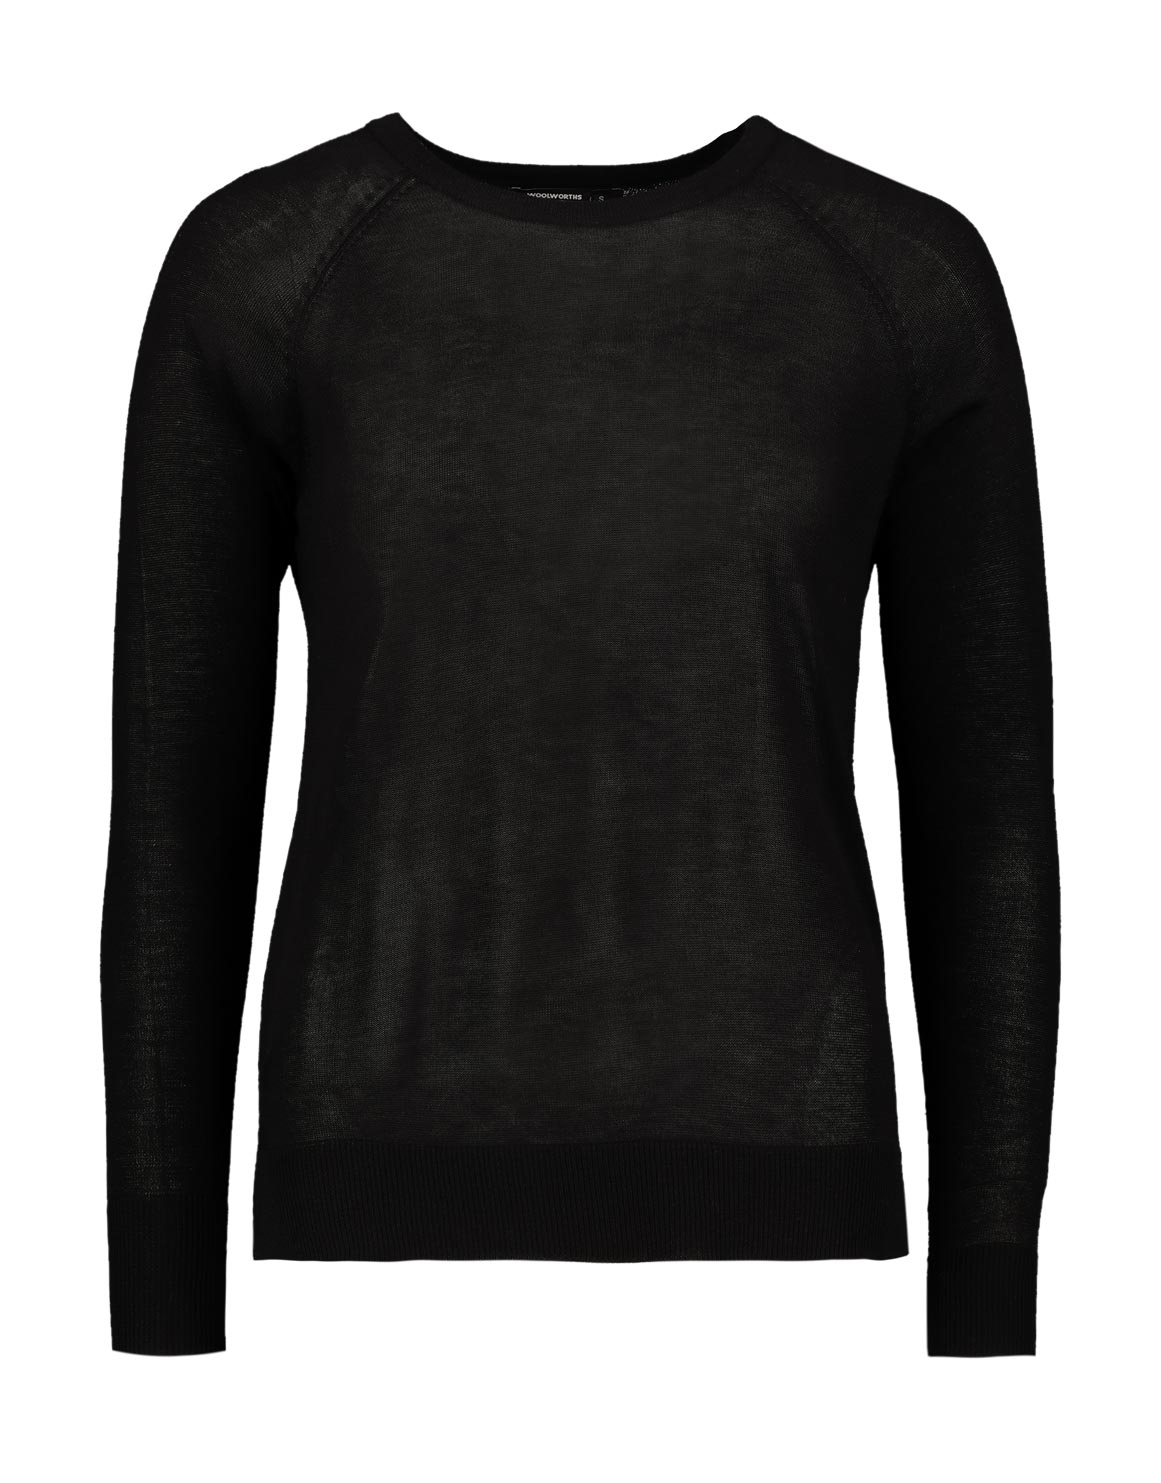 Viscose Blend Knit Top - Woolworths Mauritius Online